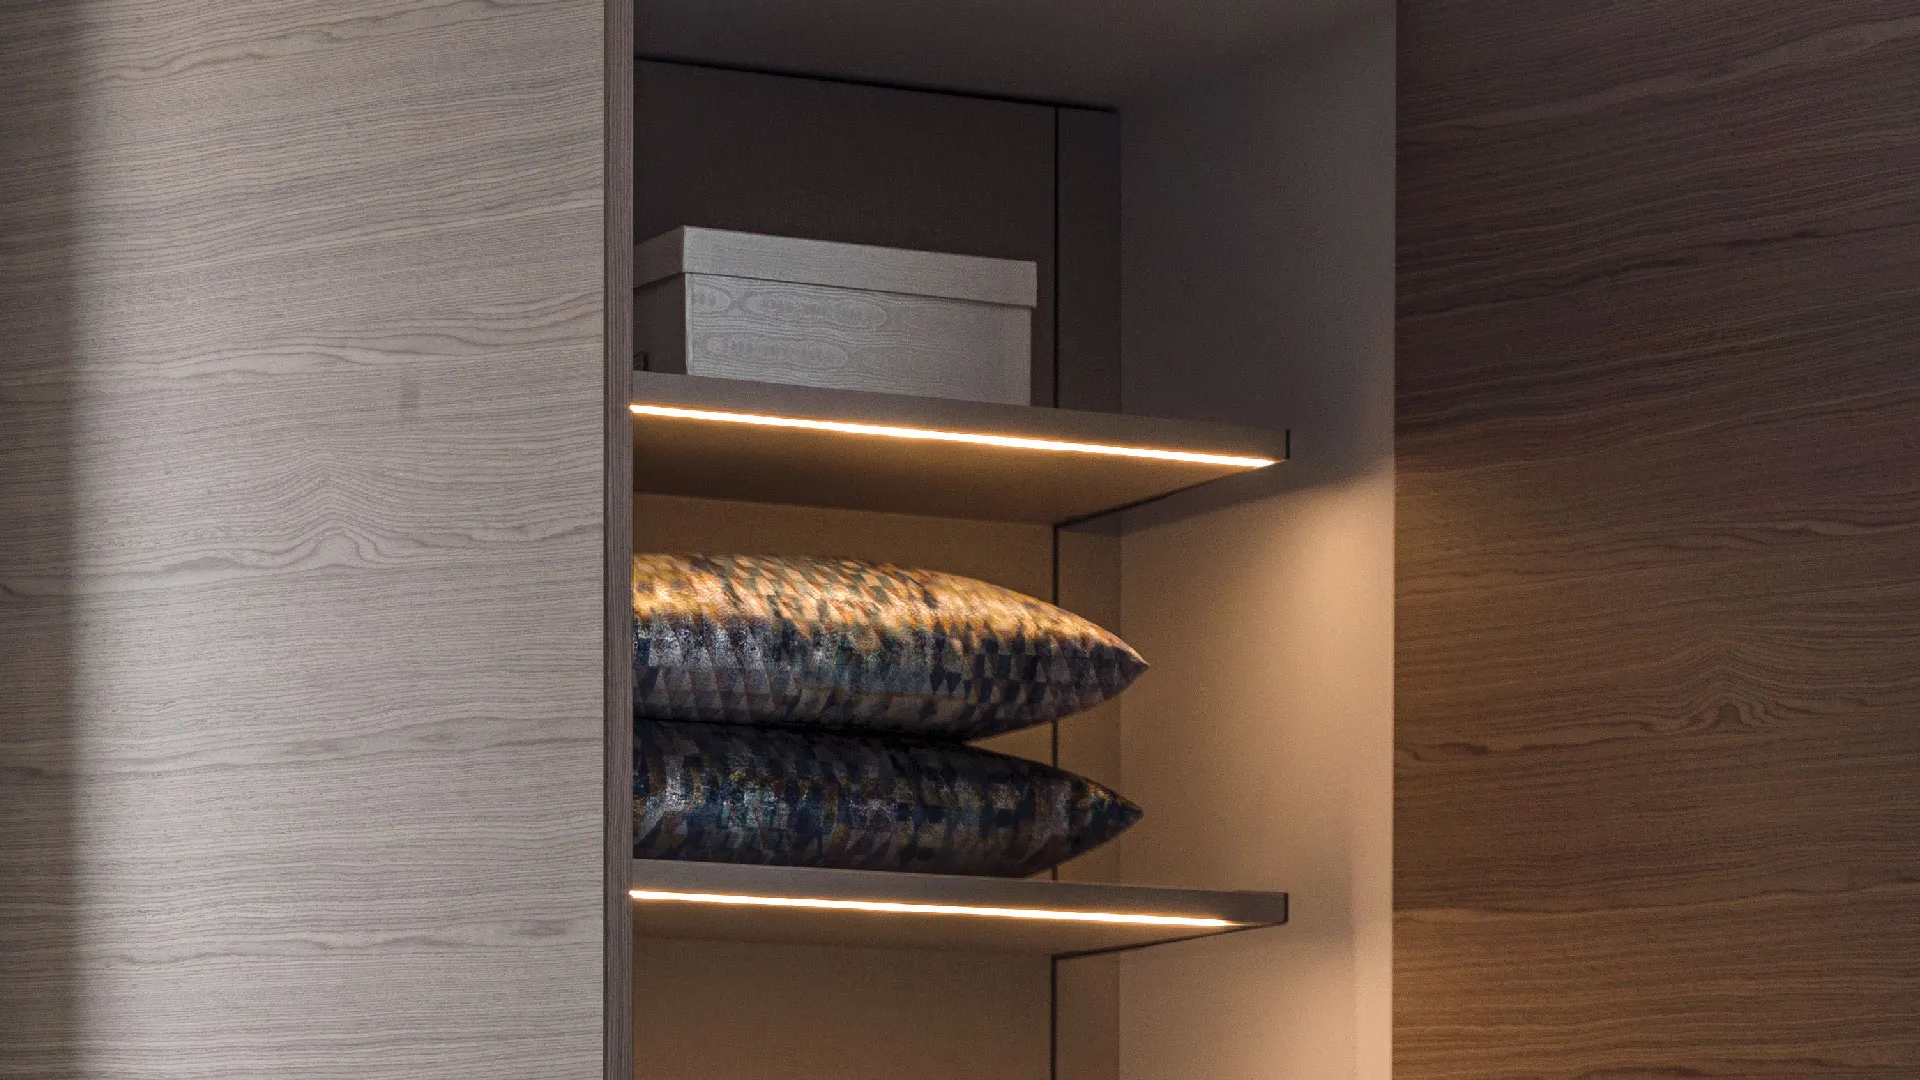 Endless options for the interior of your wardrobes. Even with light.